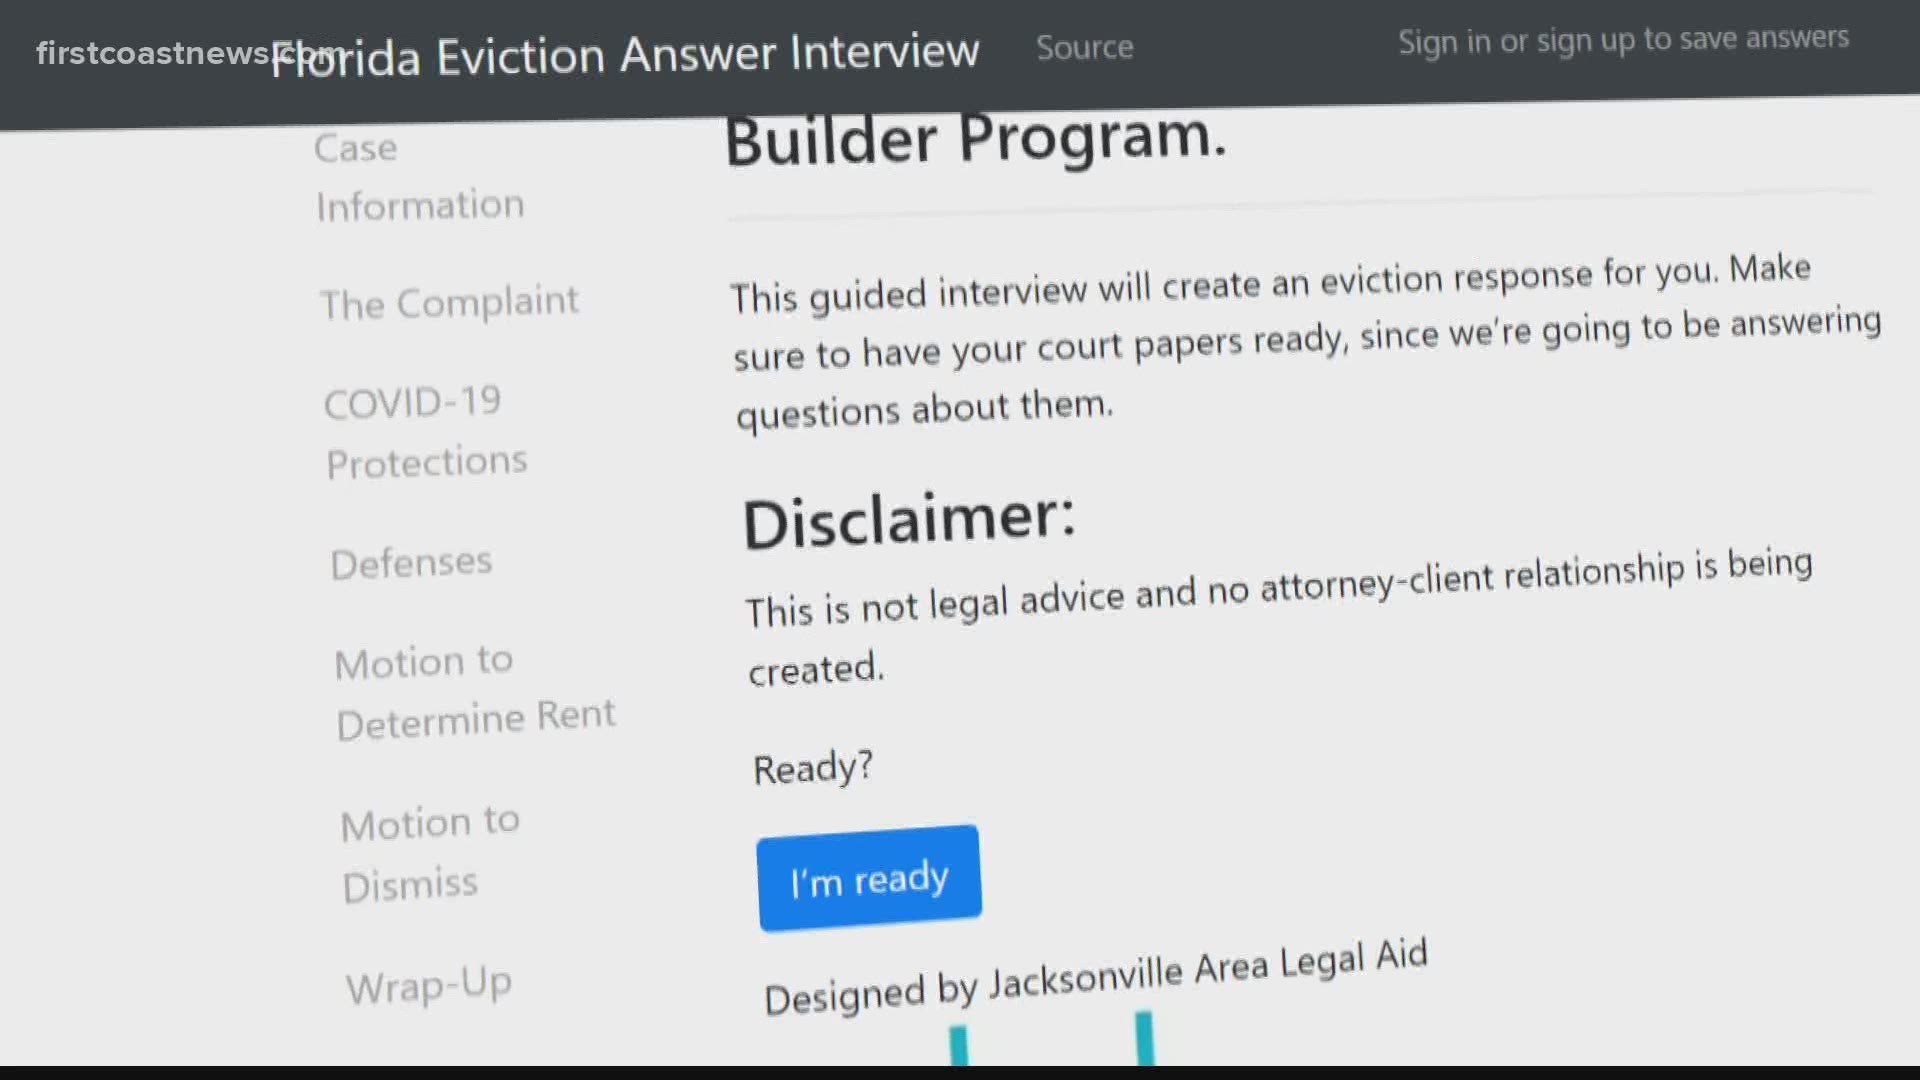 FloridaEvictionHelp.org was created to enable Floridians who are eligible for a delay to avoid being evicted because of an inadequate answer to the eviction filing.